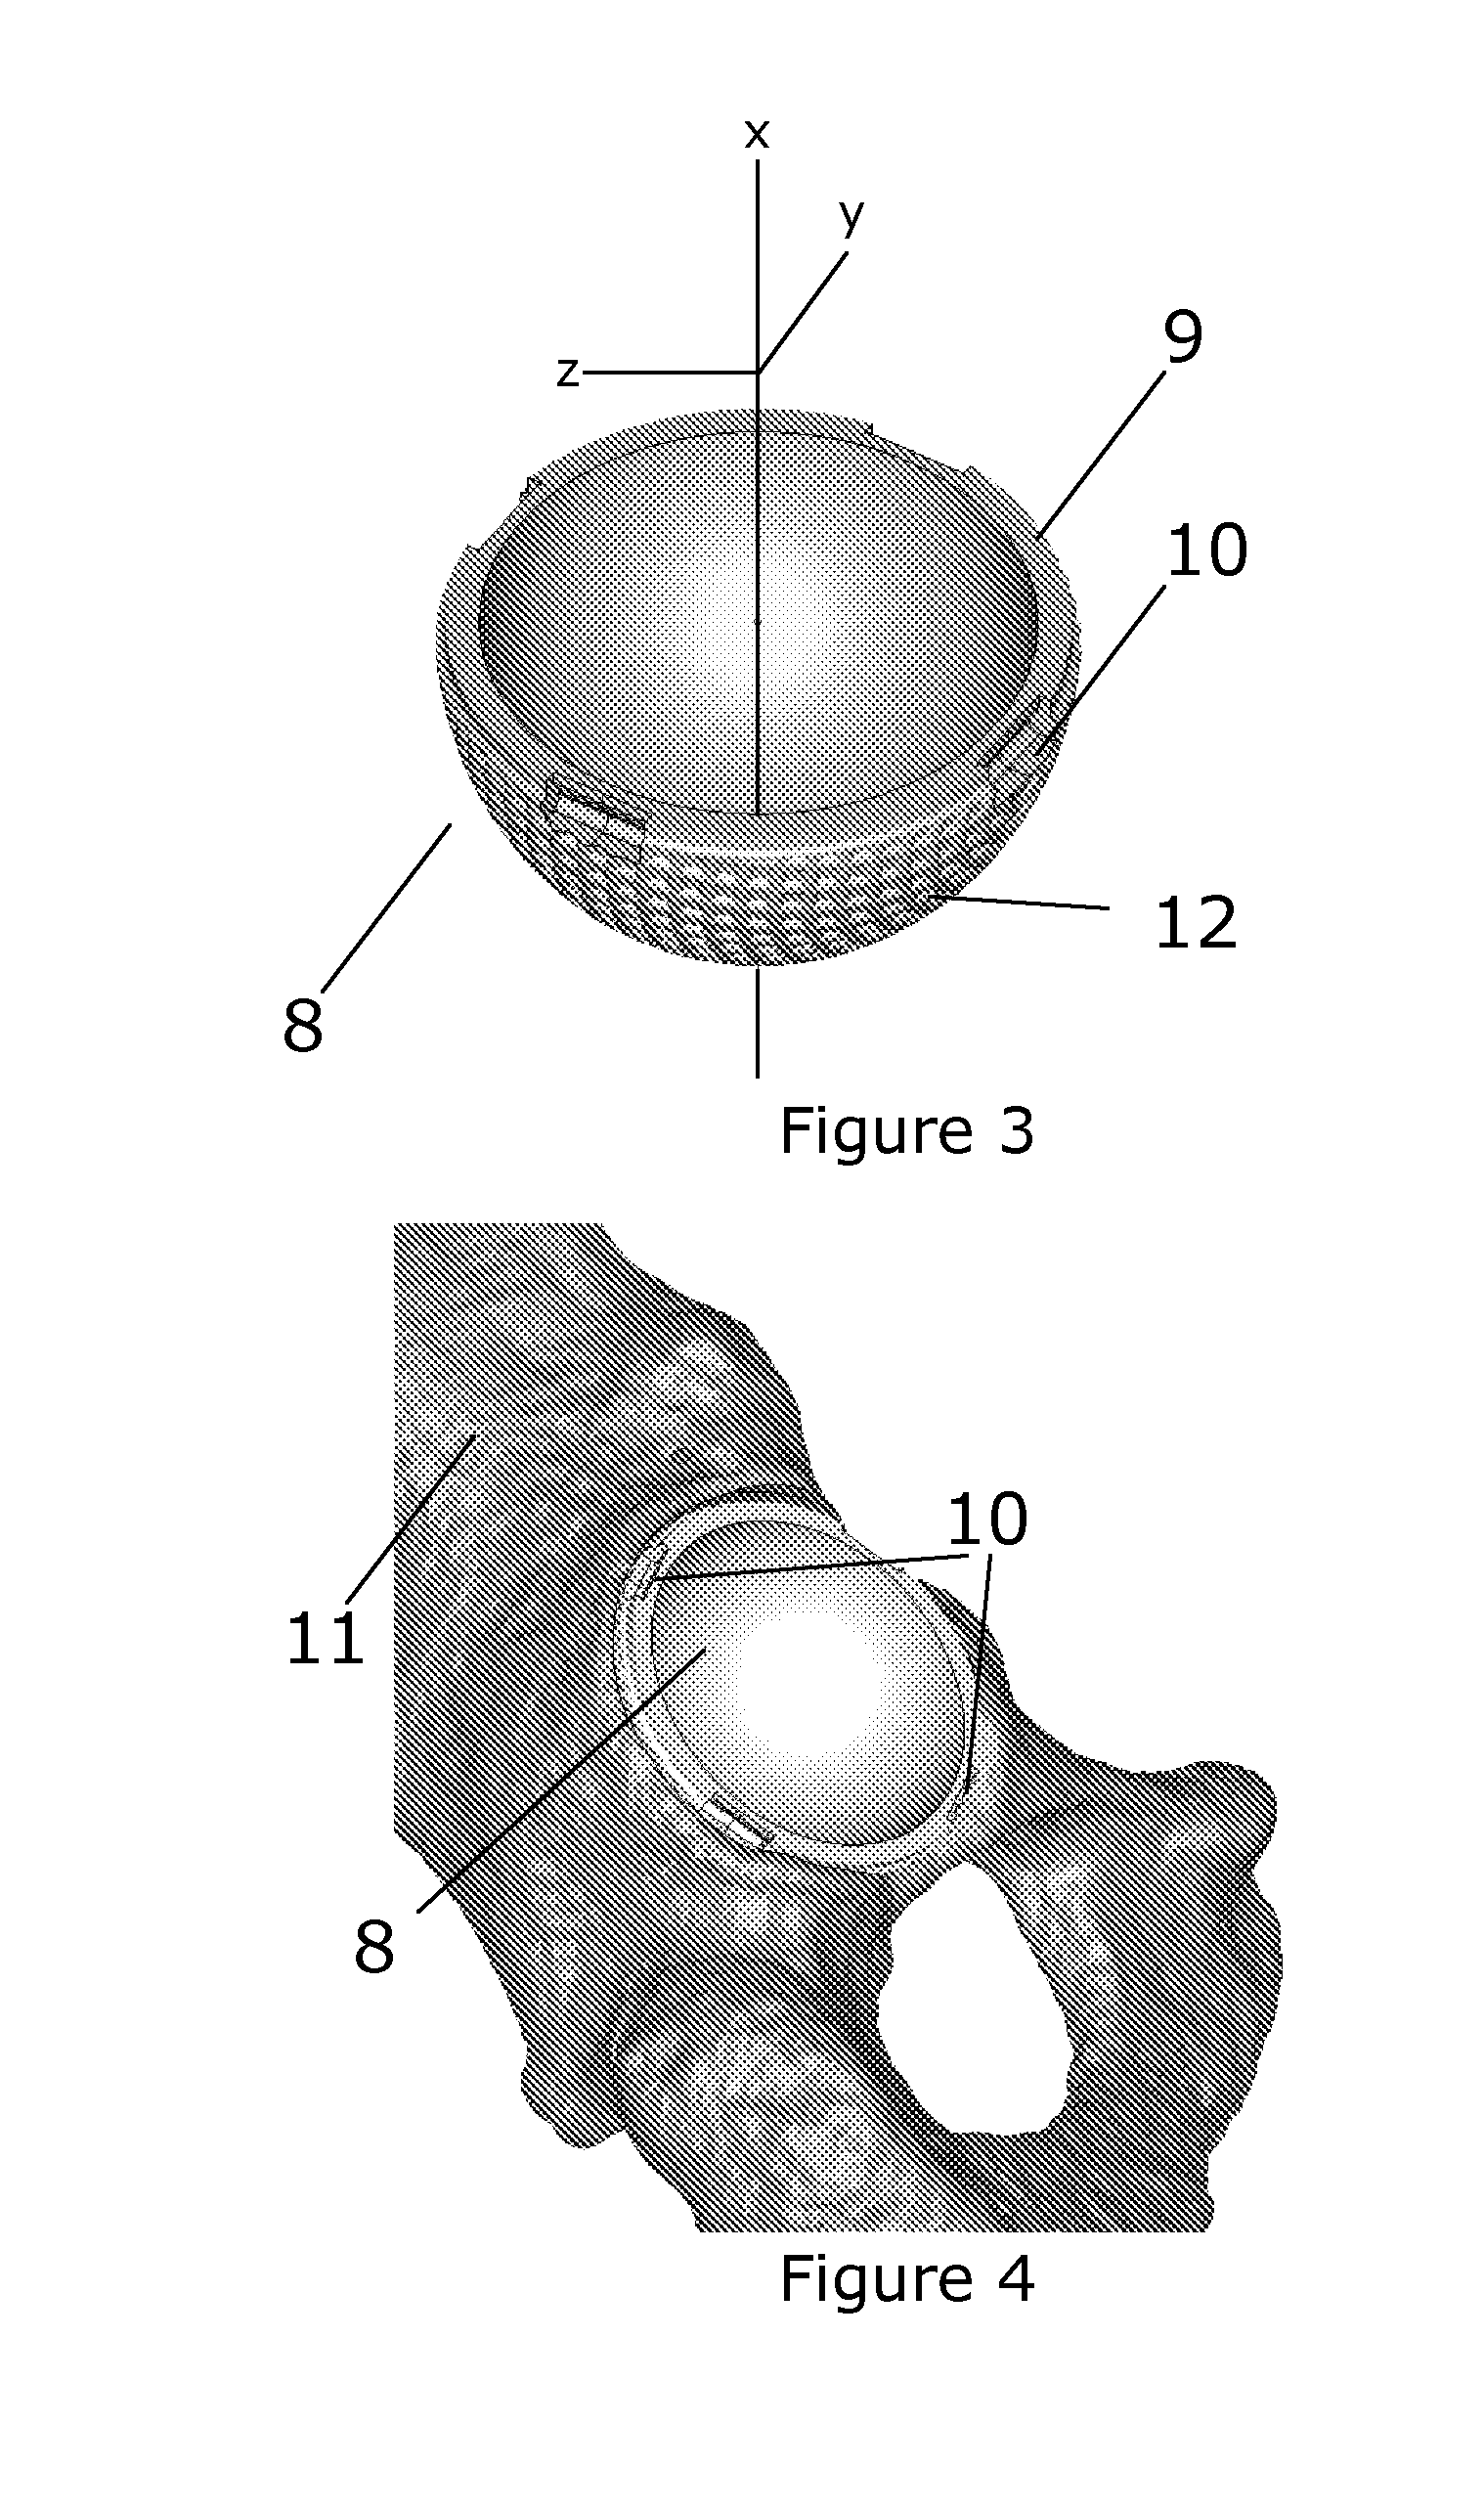 Guiding instruments and impactors for an acetabular cup implant, combinations thereof, methods for manufacturing and uses thereof